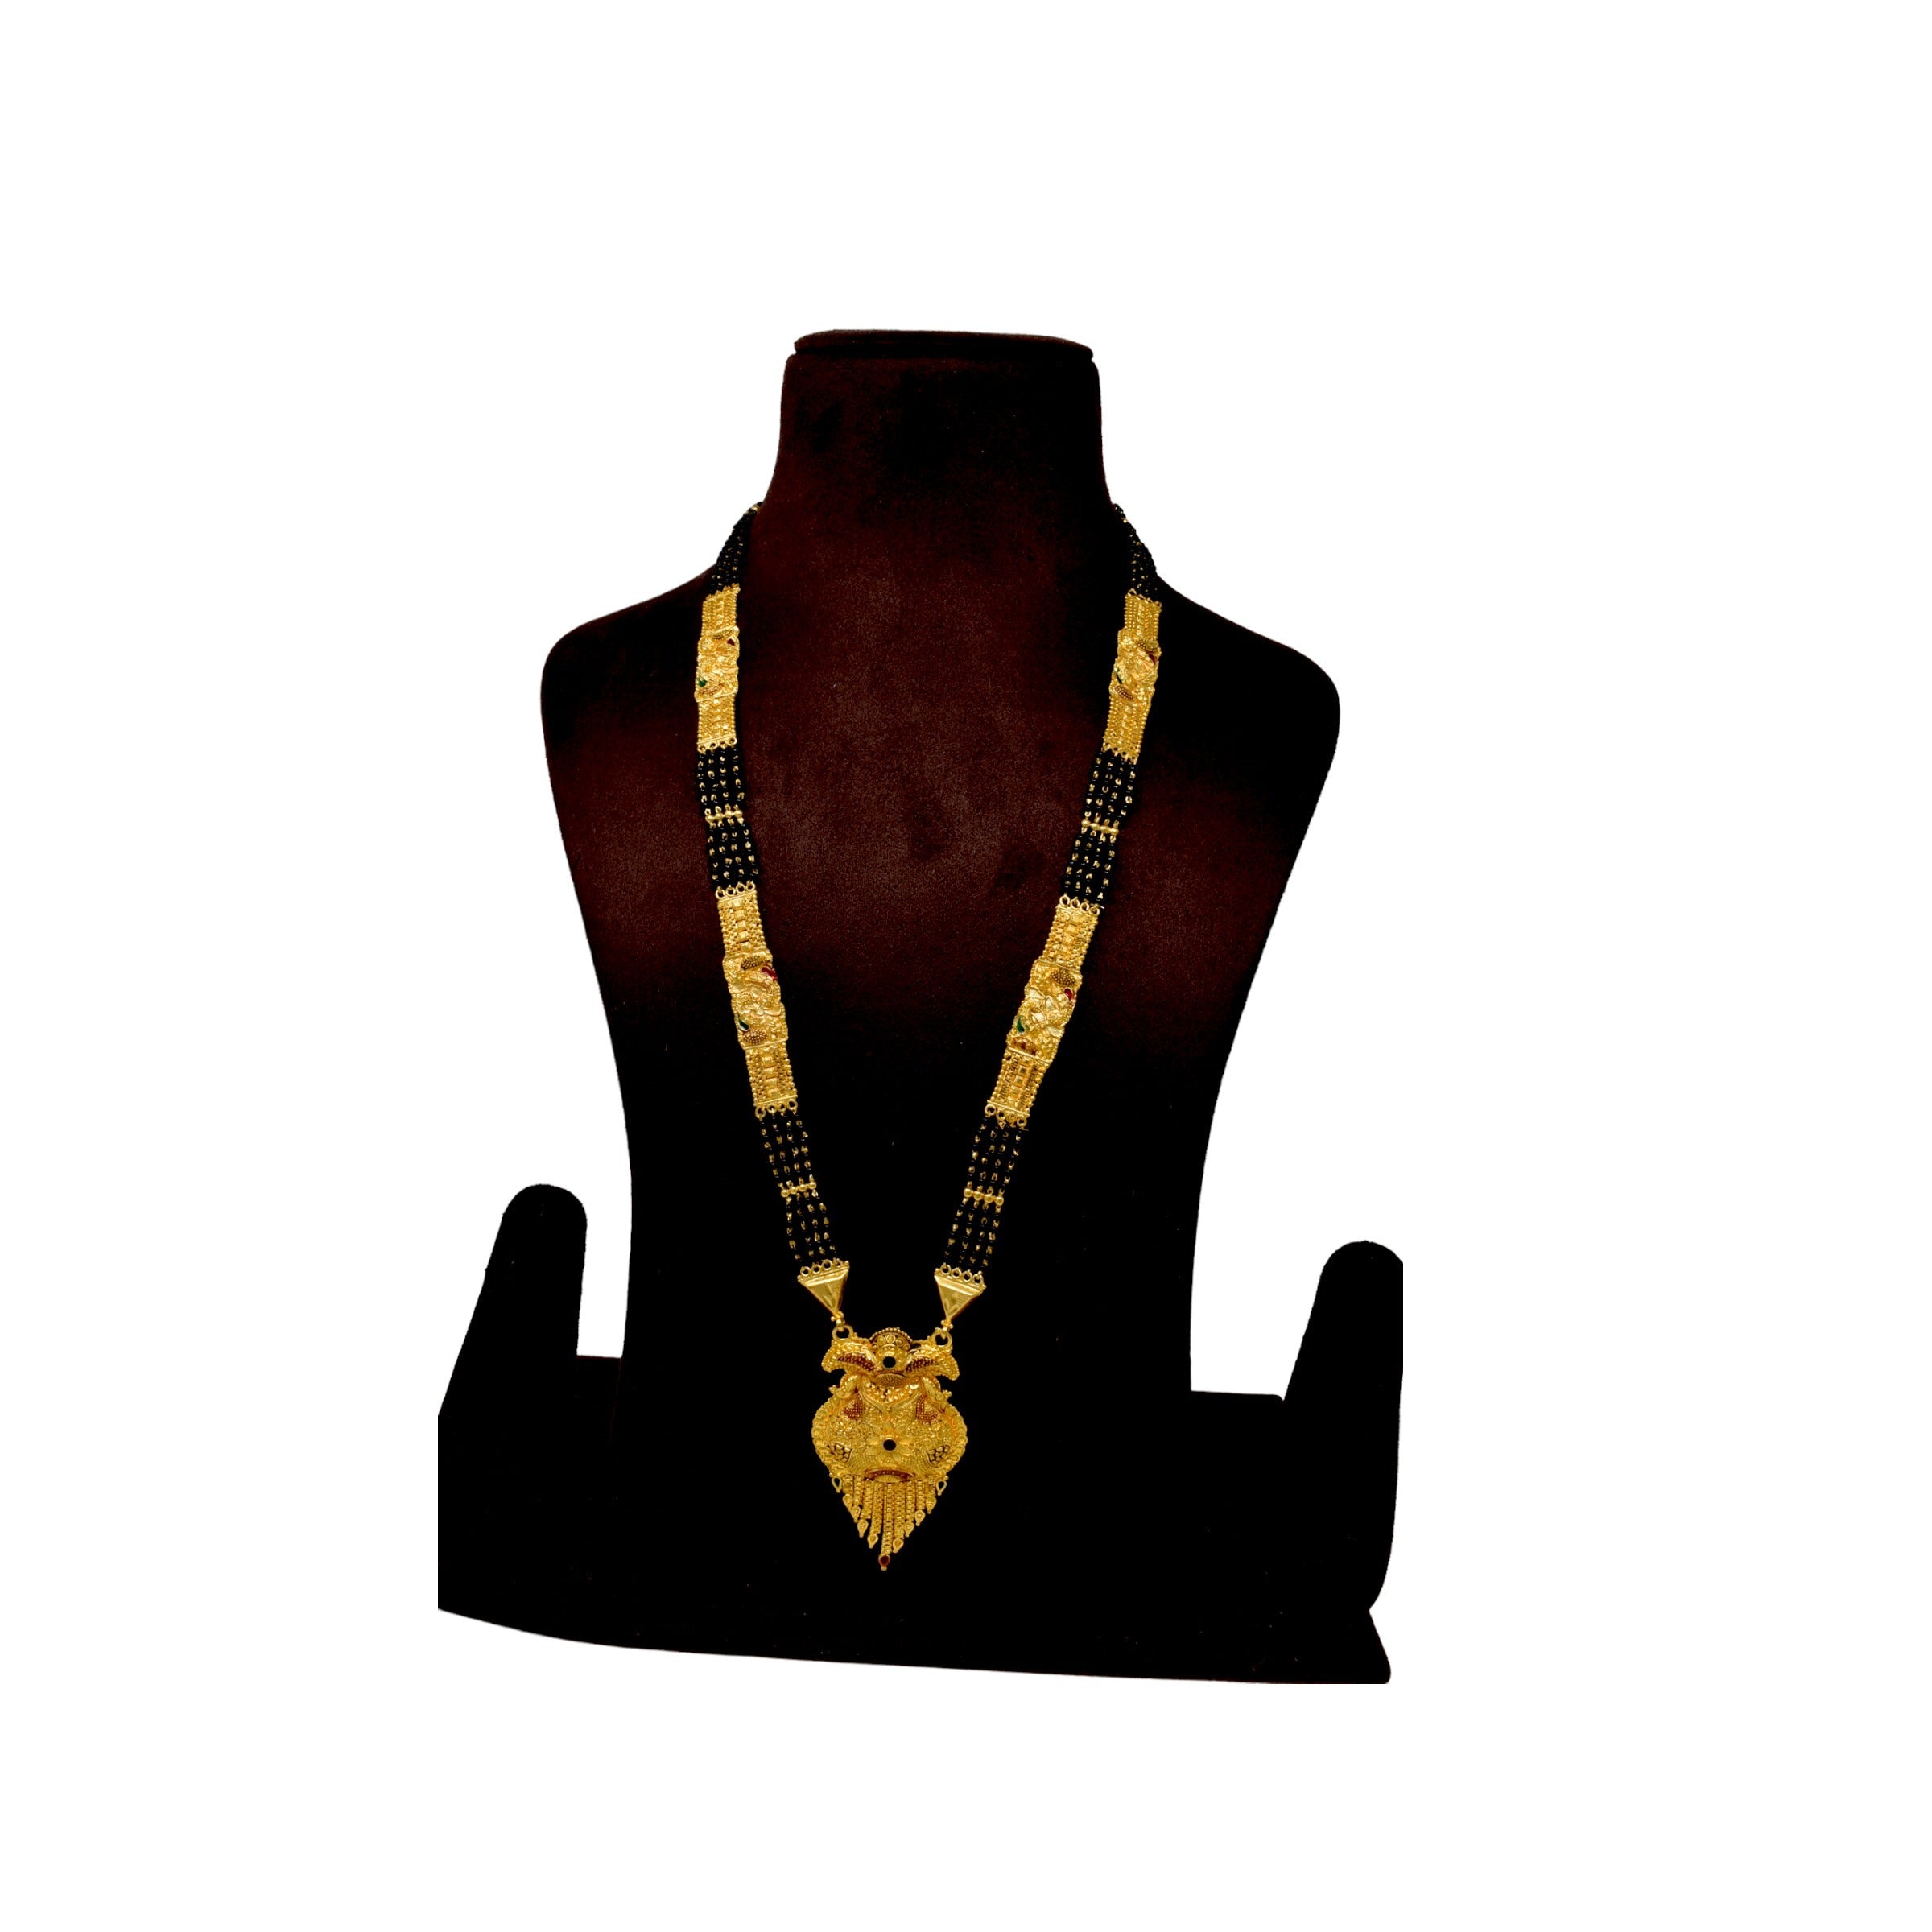 Gold Plated Mangalsutra with Golden and Black beads exclusively for Indian women.